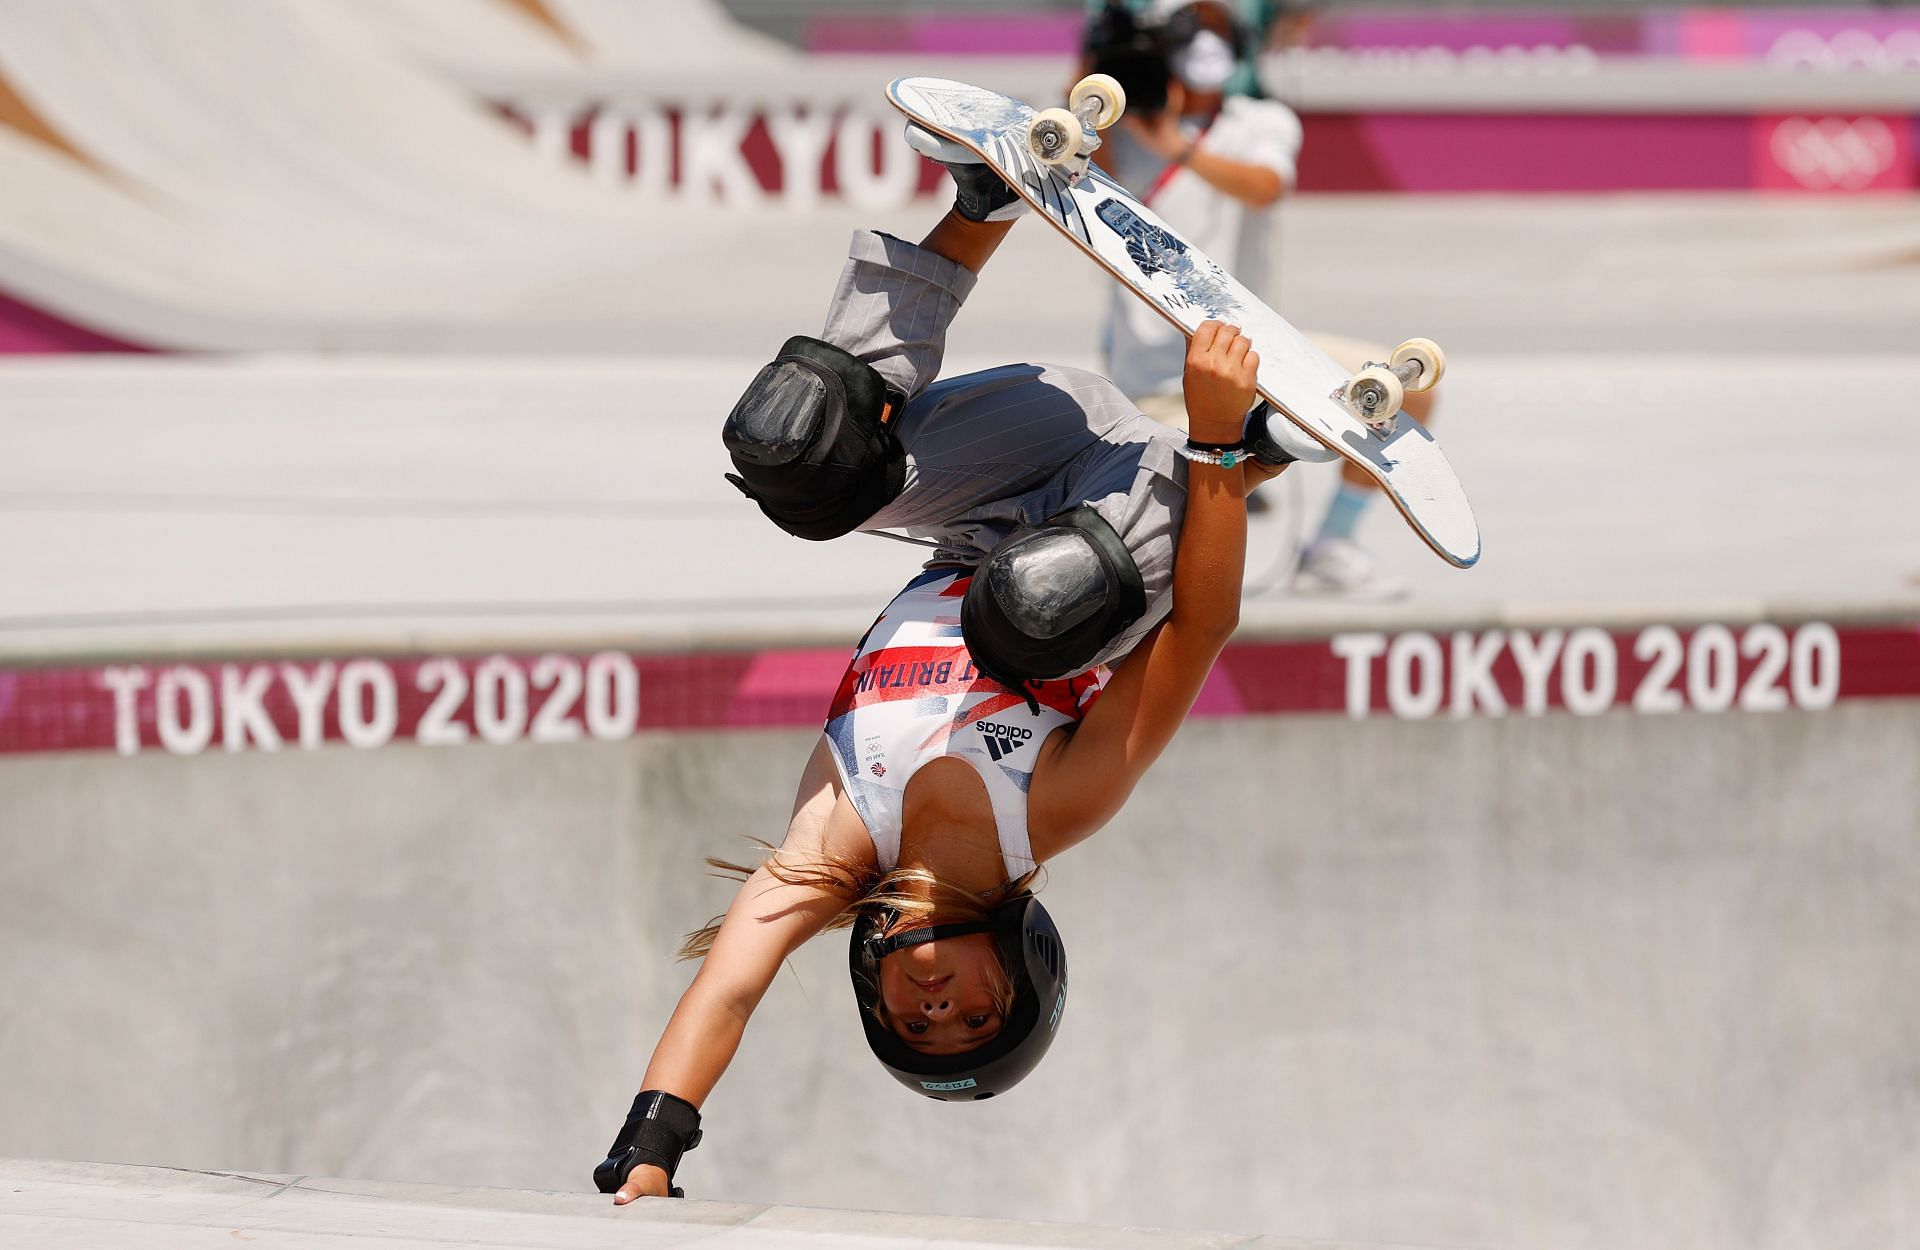 Sky Brown competes during the Women&#039;s Skateboarding Park Finals at the Tokyo 2020 Olympic Games at Ariake Urban Sports Park in Tokyo, Japan.